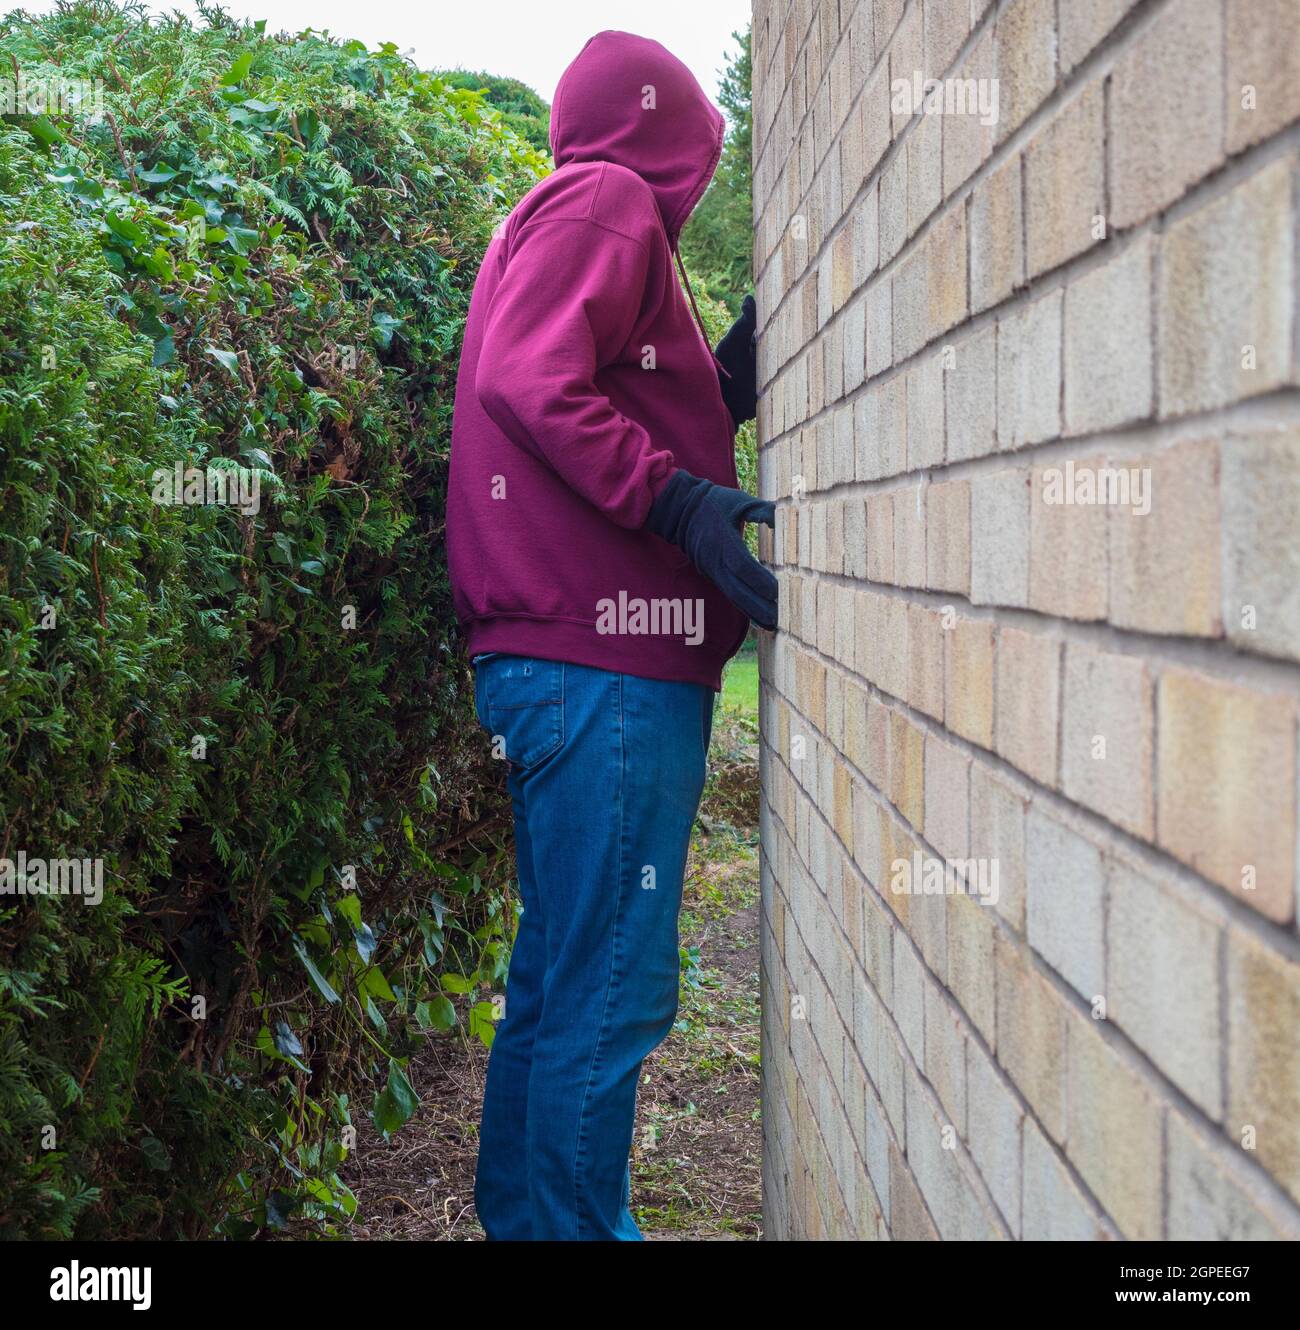 A man wearing denim jeans, hooded top and gloves, furtively standing next to an outside brick wall in daylight, peering around the corner. Stock Photo